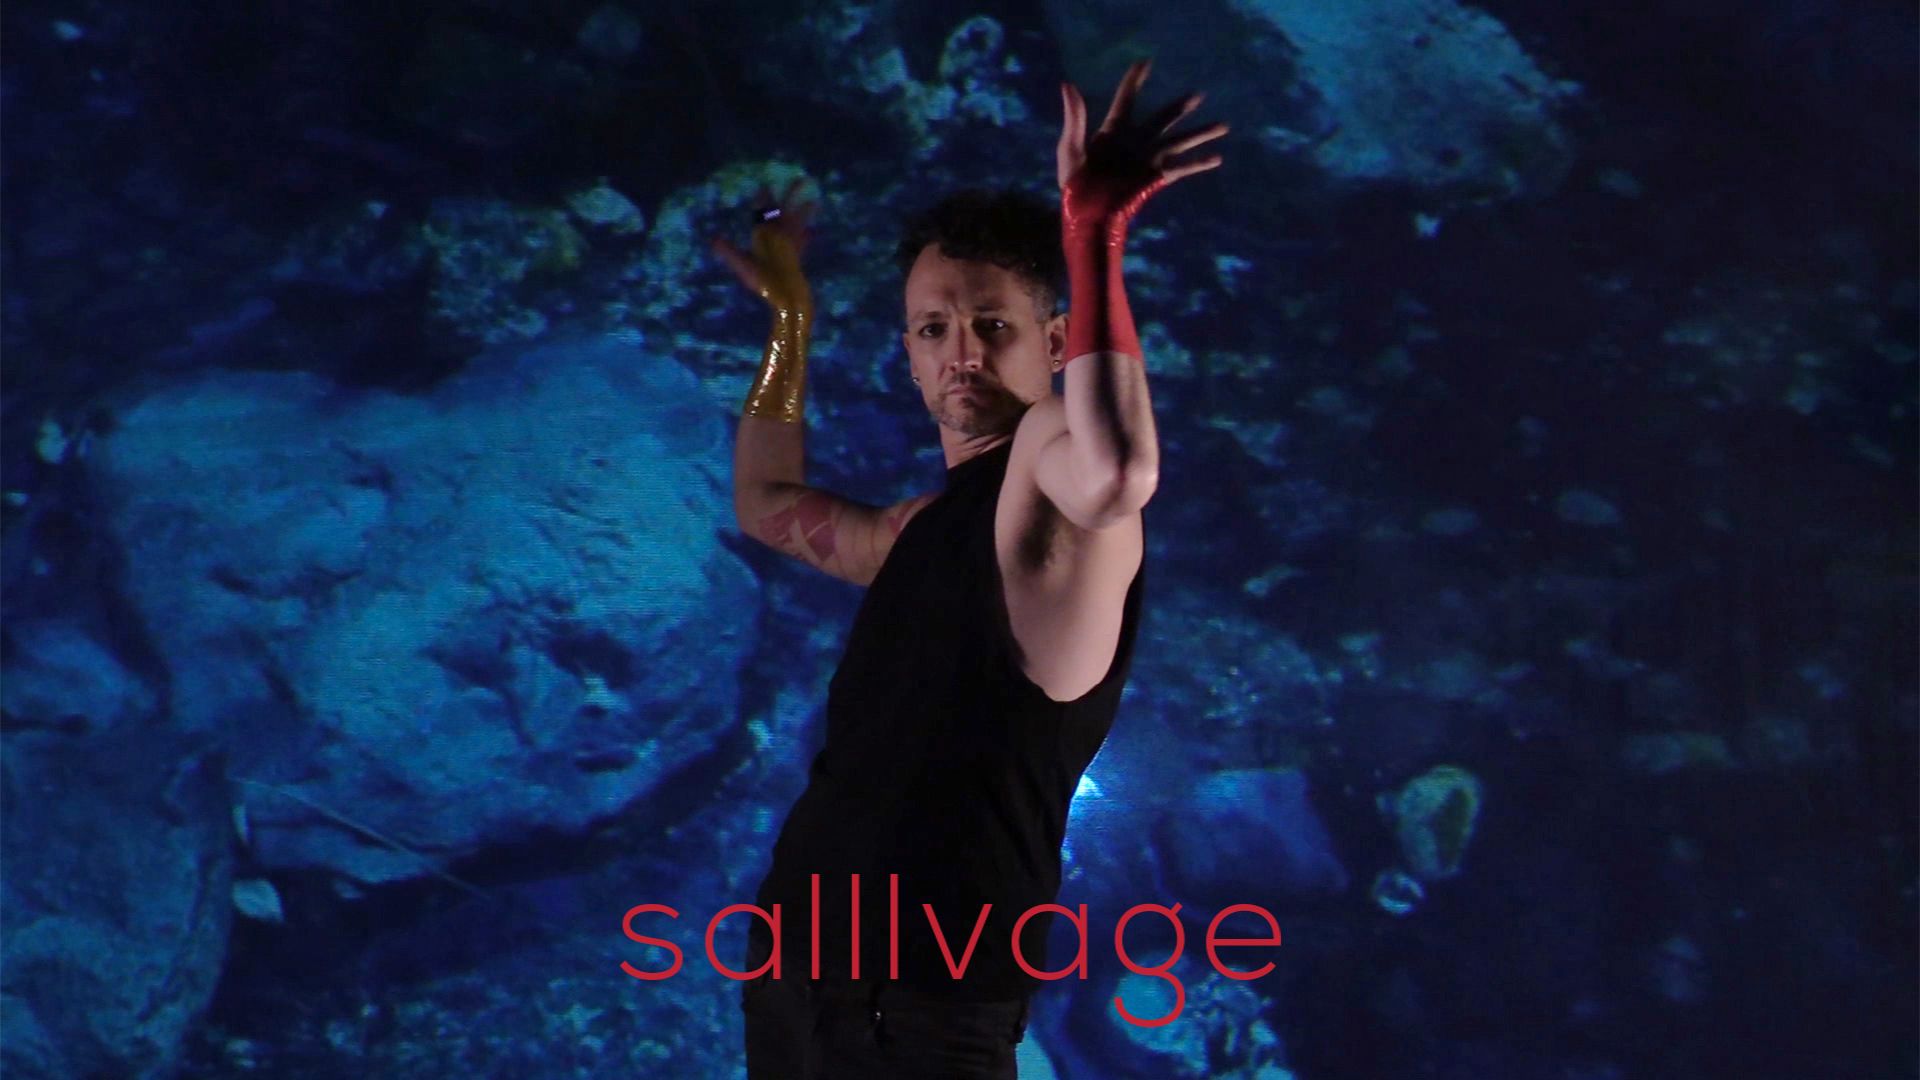 Male-identifying person in a dance pose, hands outstretched sideways. Clouds in the backgroung. Text: "salllvage"